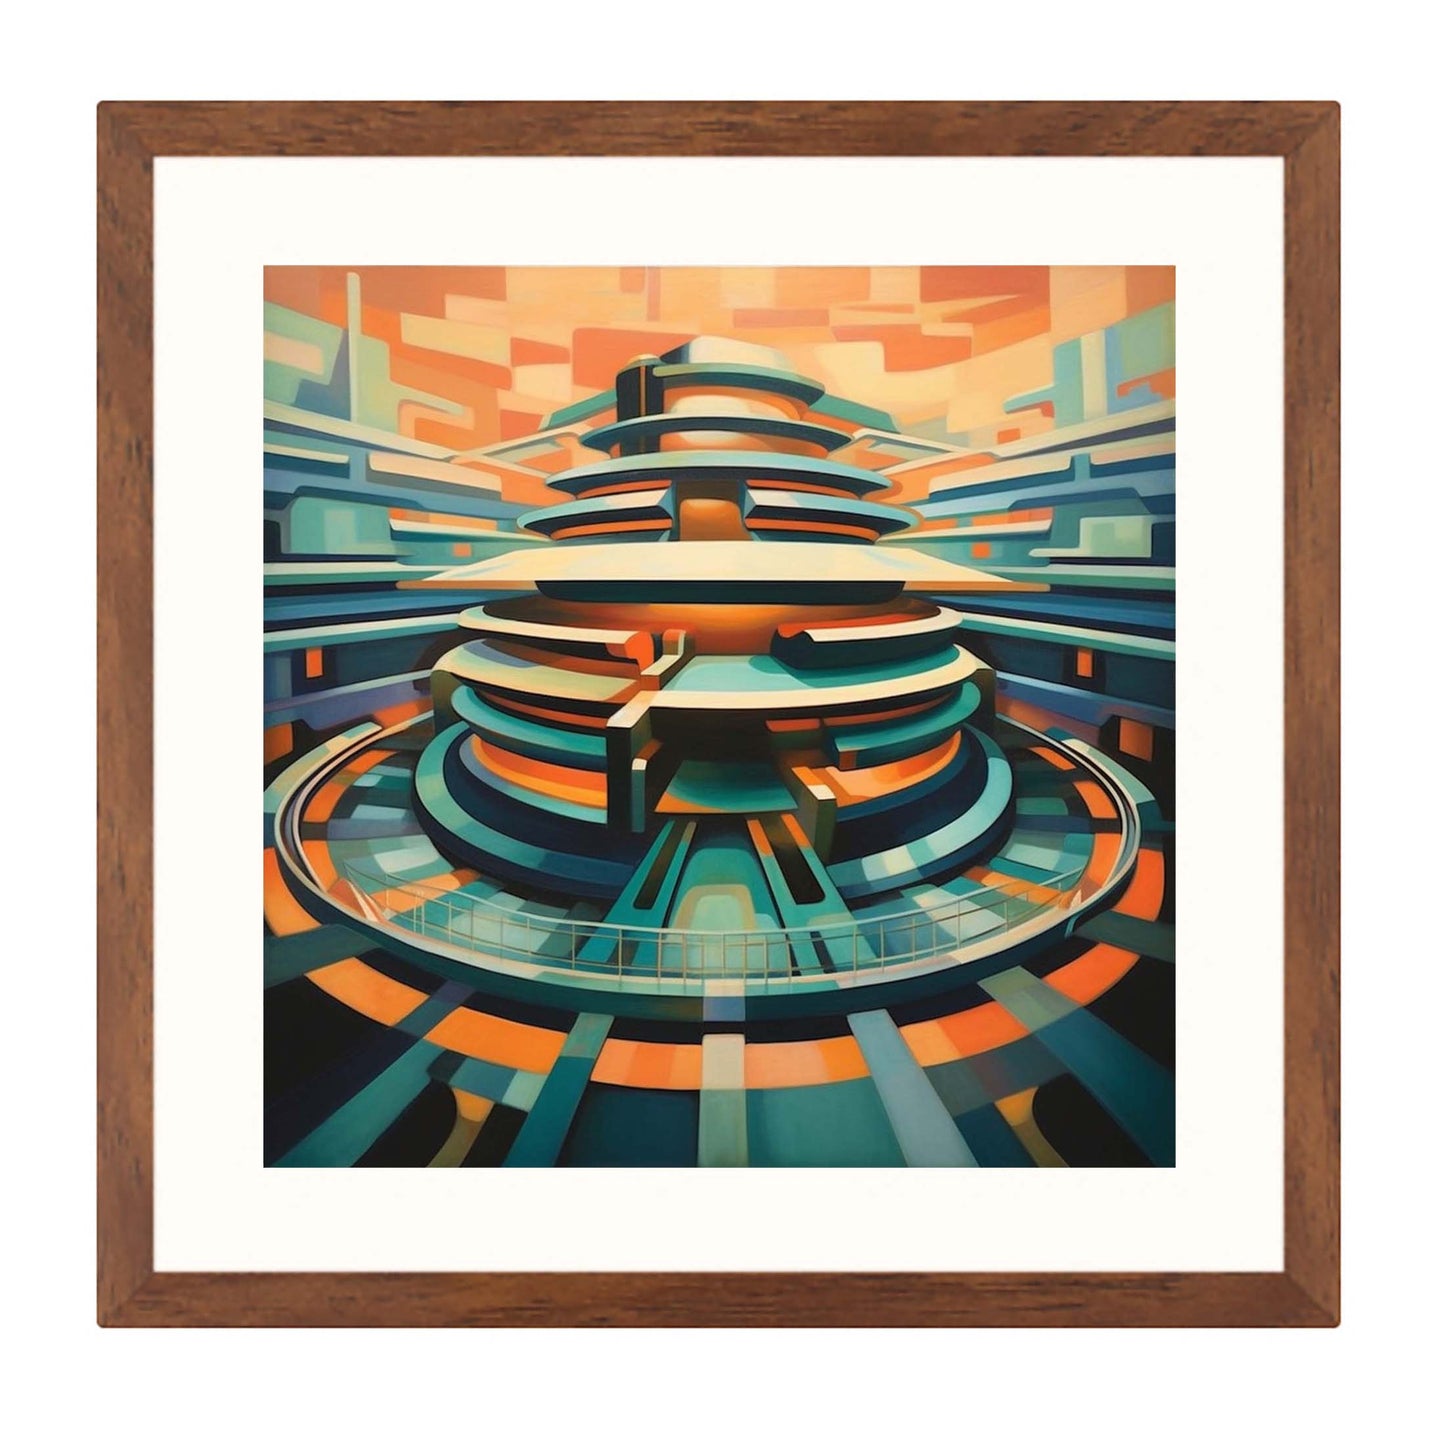 New York Guggenheim Museum - mural in the style of futurism